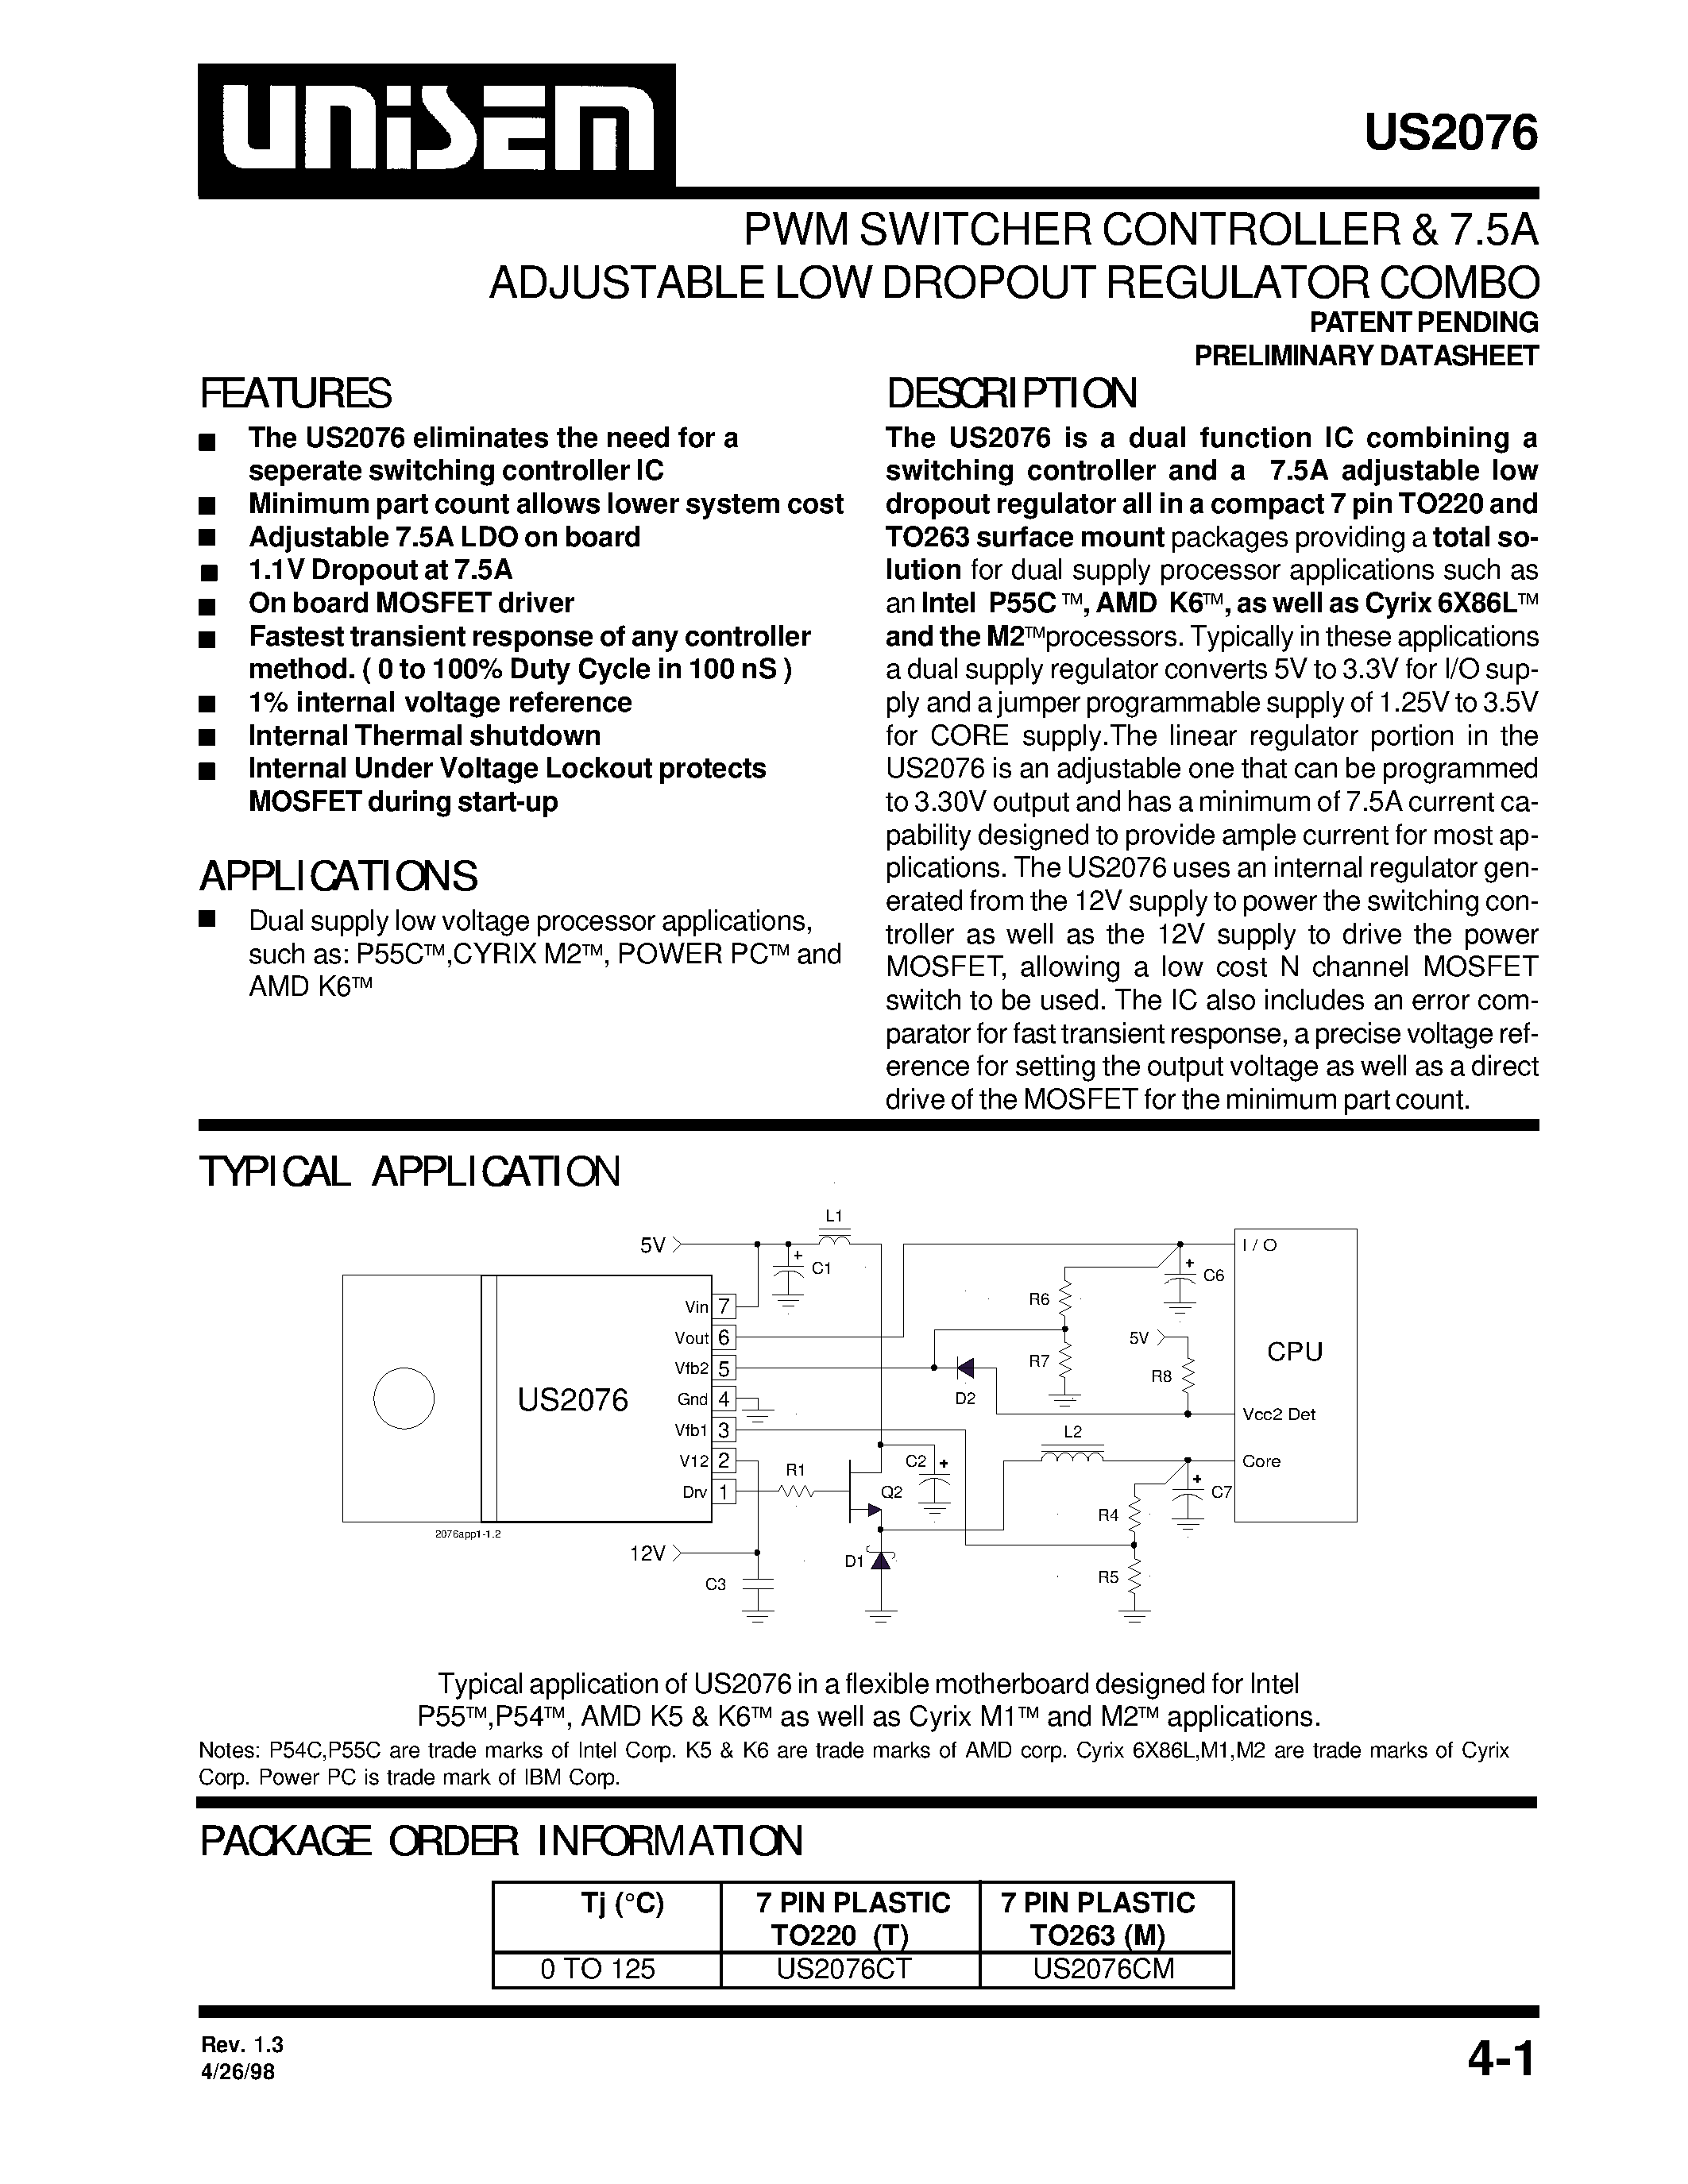 Datasheet US2076CT - PWM SWITCHER CONTROLLER & 7.5A ADJUSTABLE LOW DROPOUT REGULATOR COMBO page 1